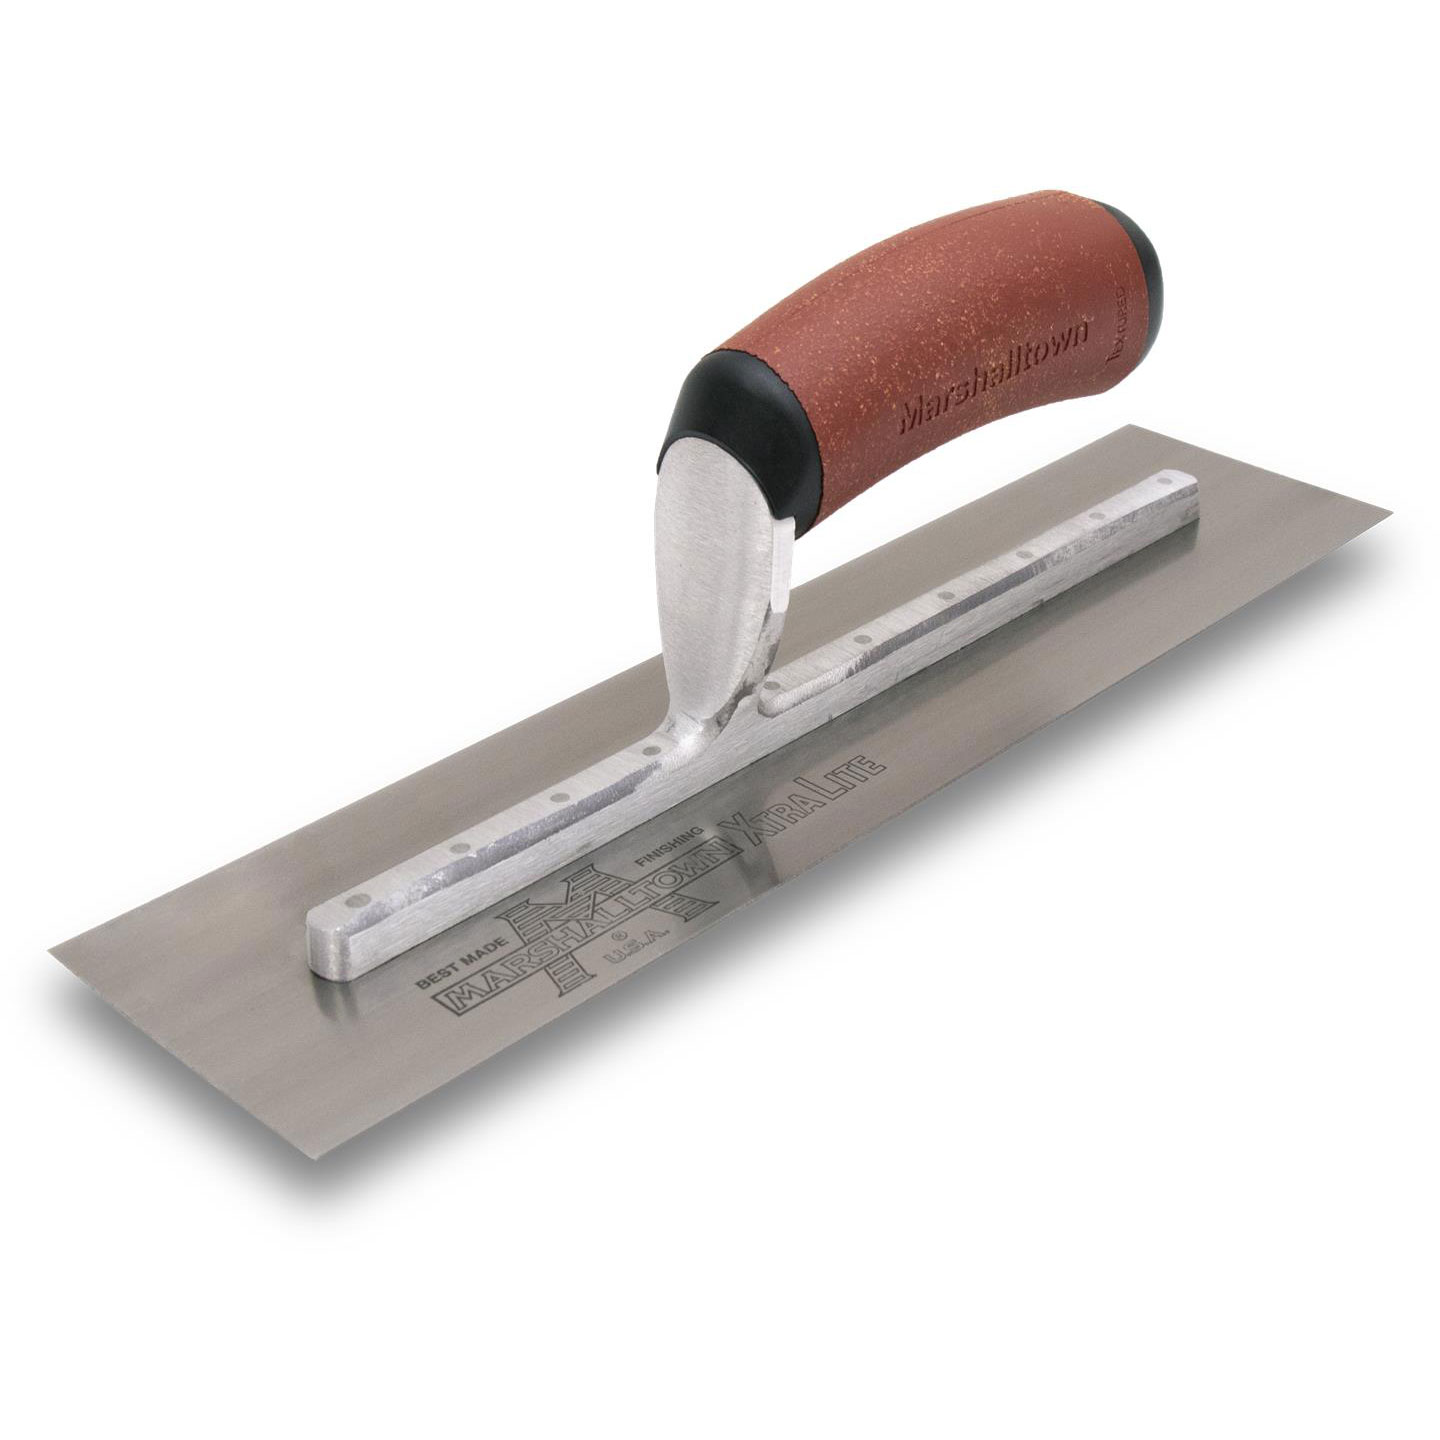 Marshalltown MXS75DC 18in x 3in Finishing Trowel with DuraCork Handle MXS75DC